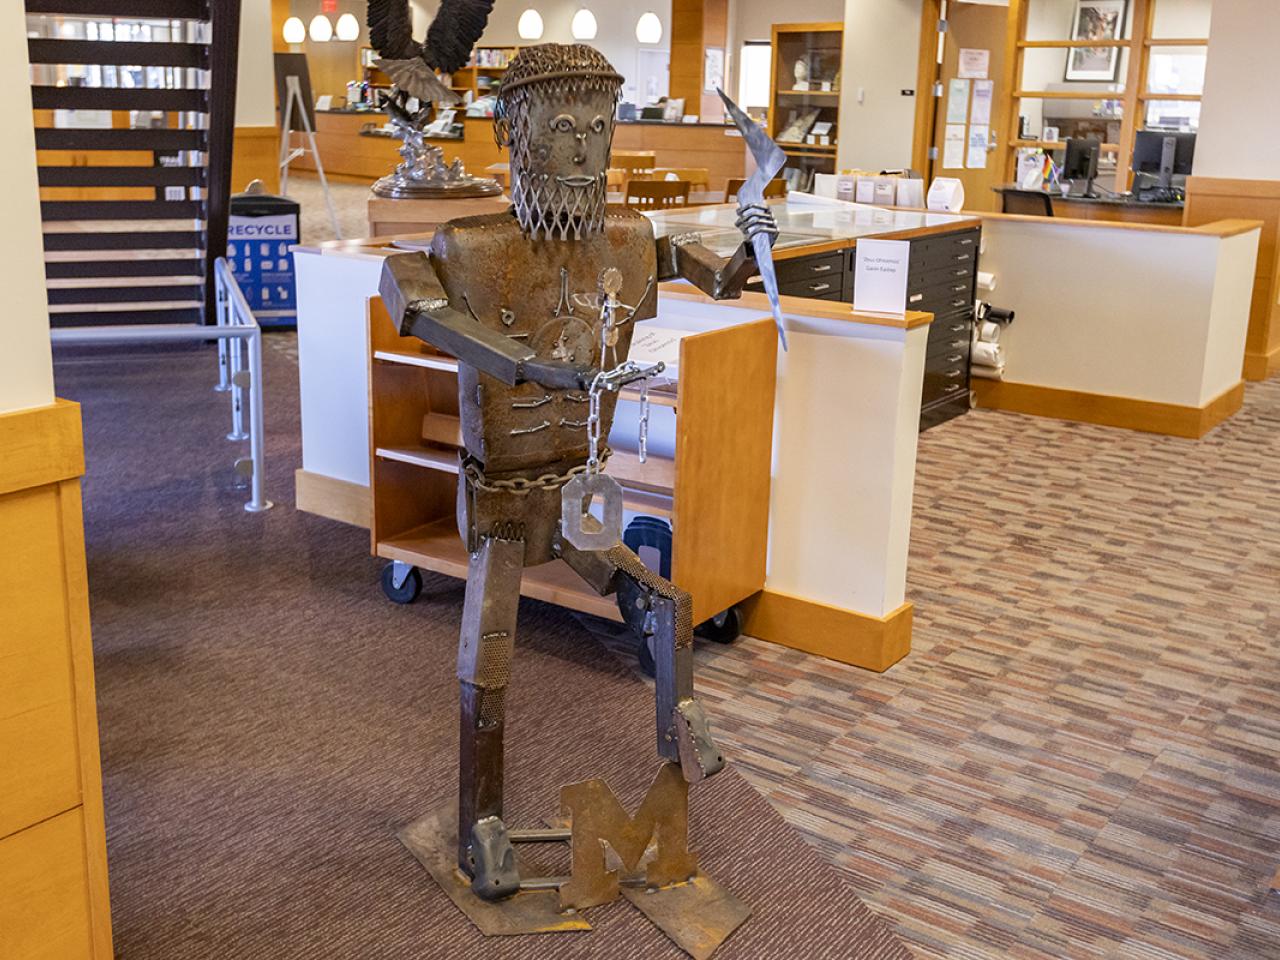 A 5-foot-tall metal statue of Zeus created by a student.